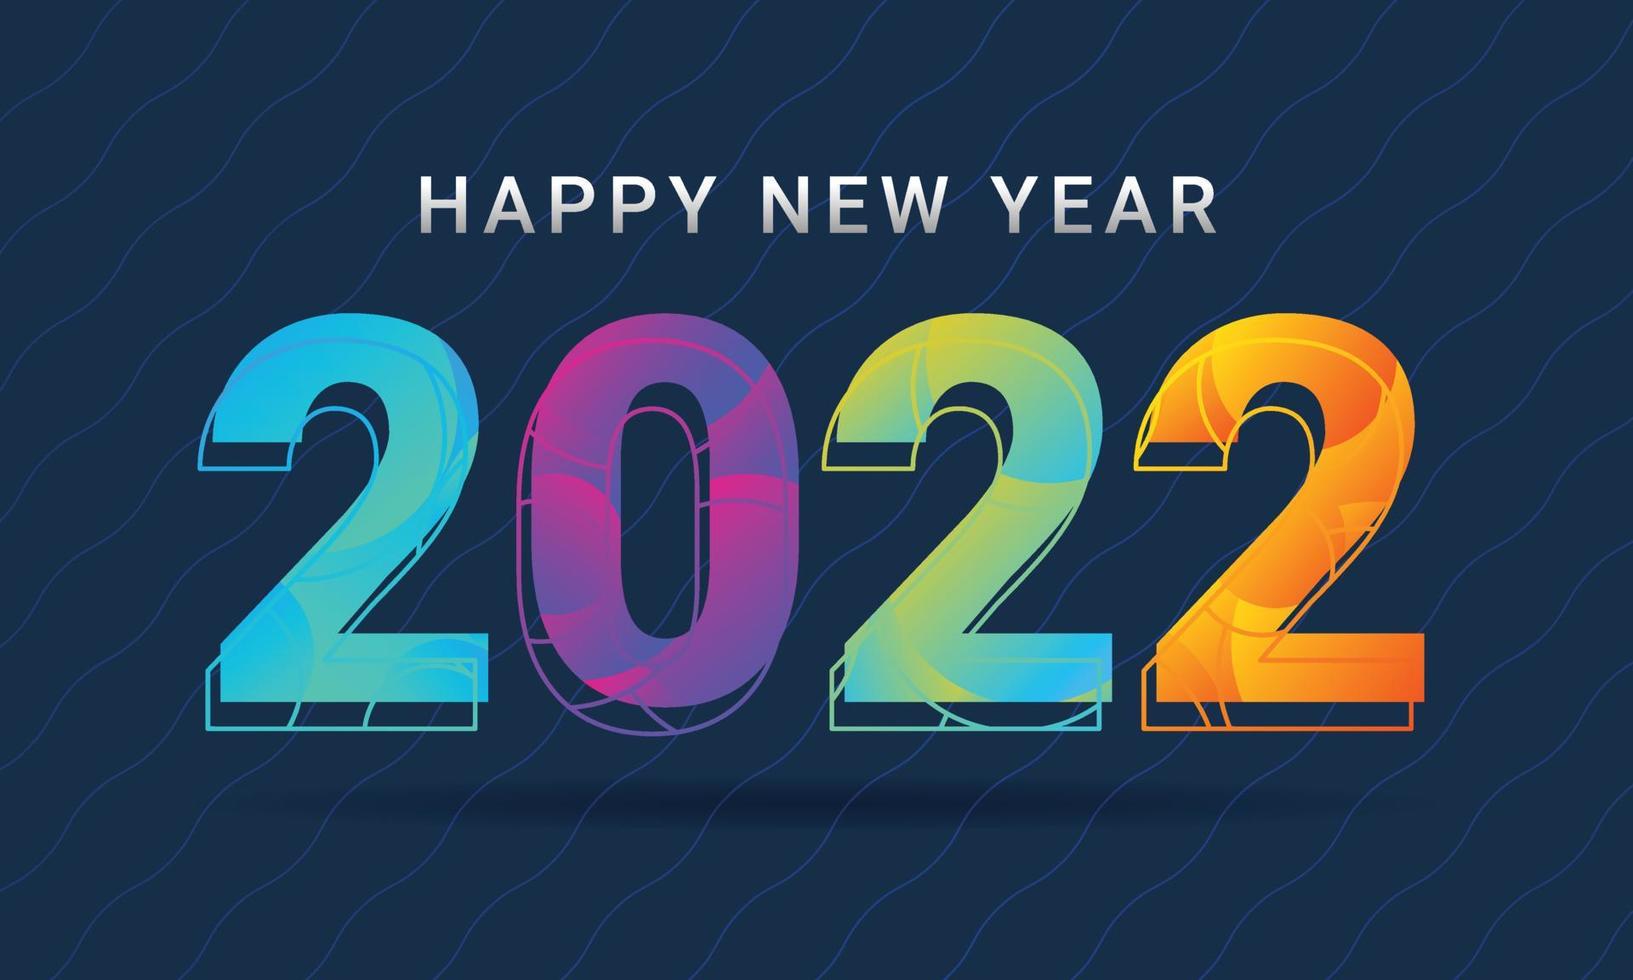 Happy new year 2022 greeting card background vector